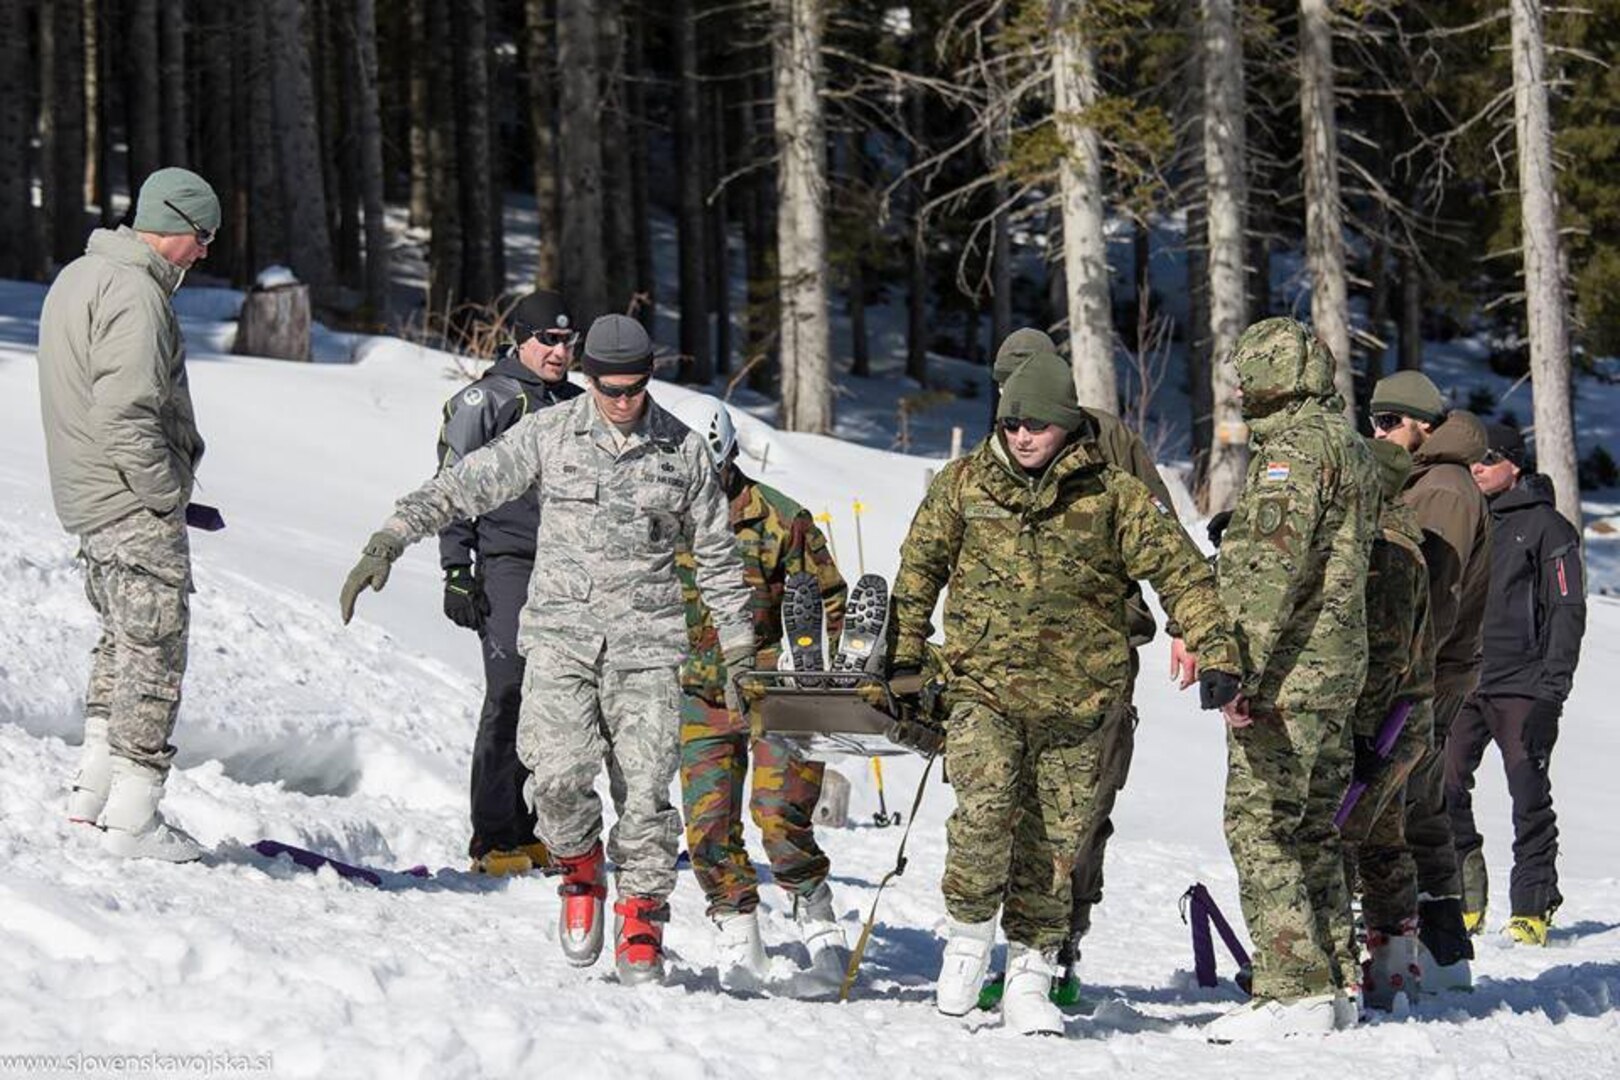 Colorado National Guard Citizen-Soldiers and Citizen-Airmen participate in the 10th anniversary NATO Non-Commissioned Officer Winter Camp in the mountains of Slovenia, March 3-10, 2017. The Colorado-Slovenia partnership is part of the National Guard’s State Partnership Program. 